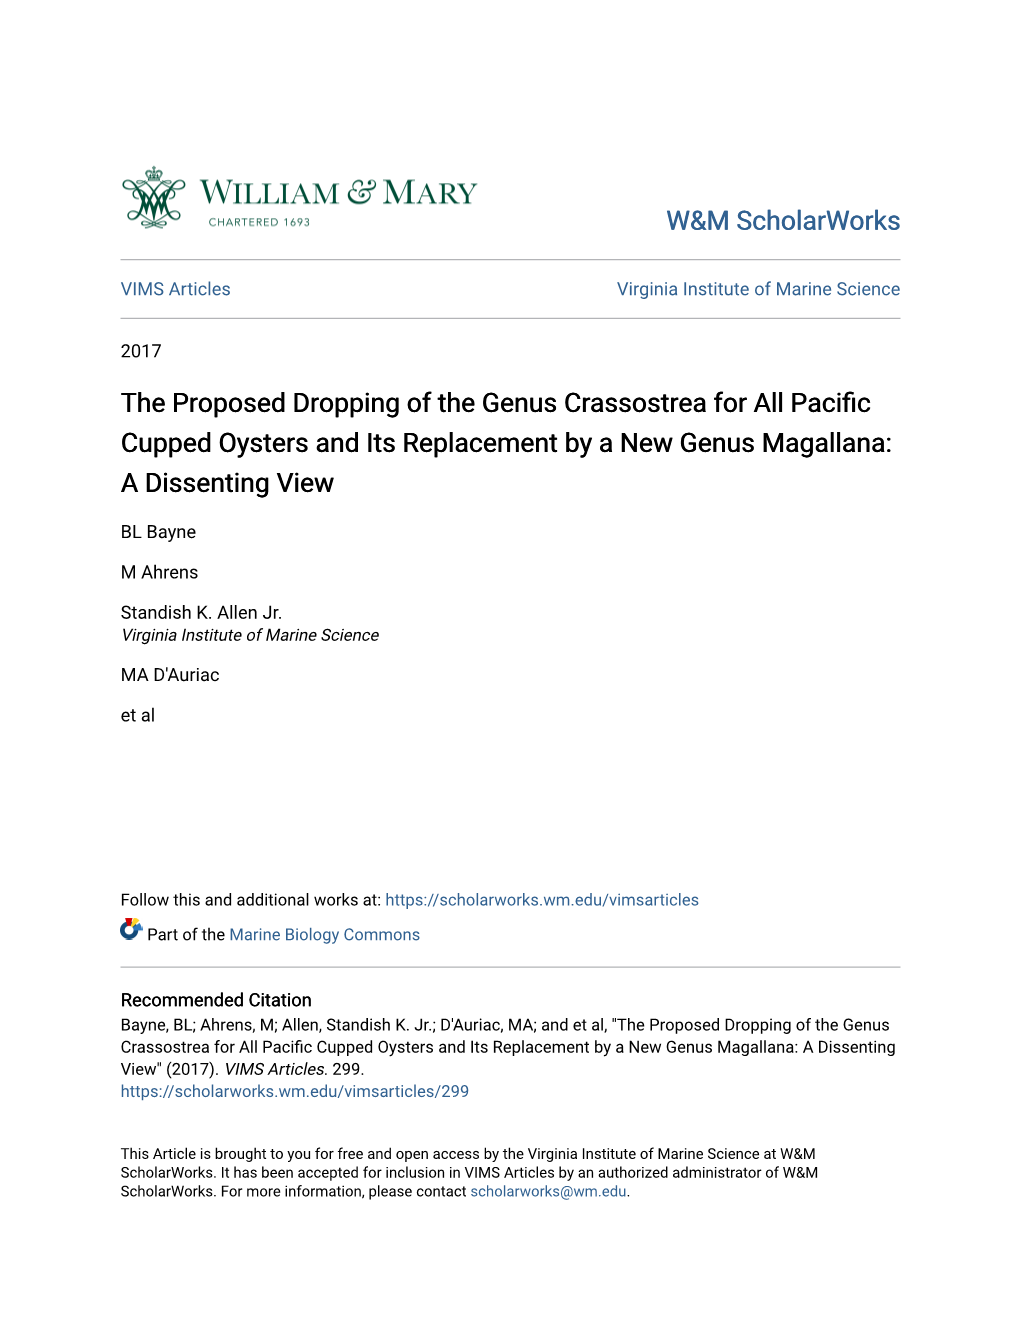 The Proposed Dropping of the Genus Crassostrea for All Pacific Cupped Oysters and Its Replacement by a New Genus Magallana: a Dissenting View